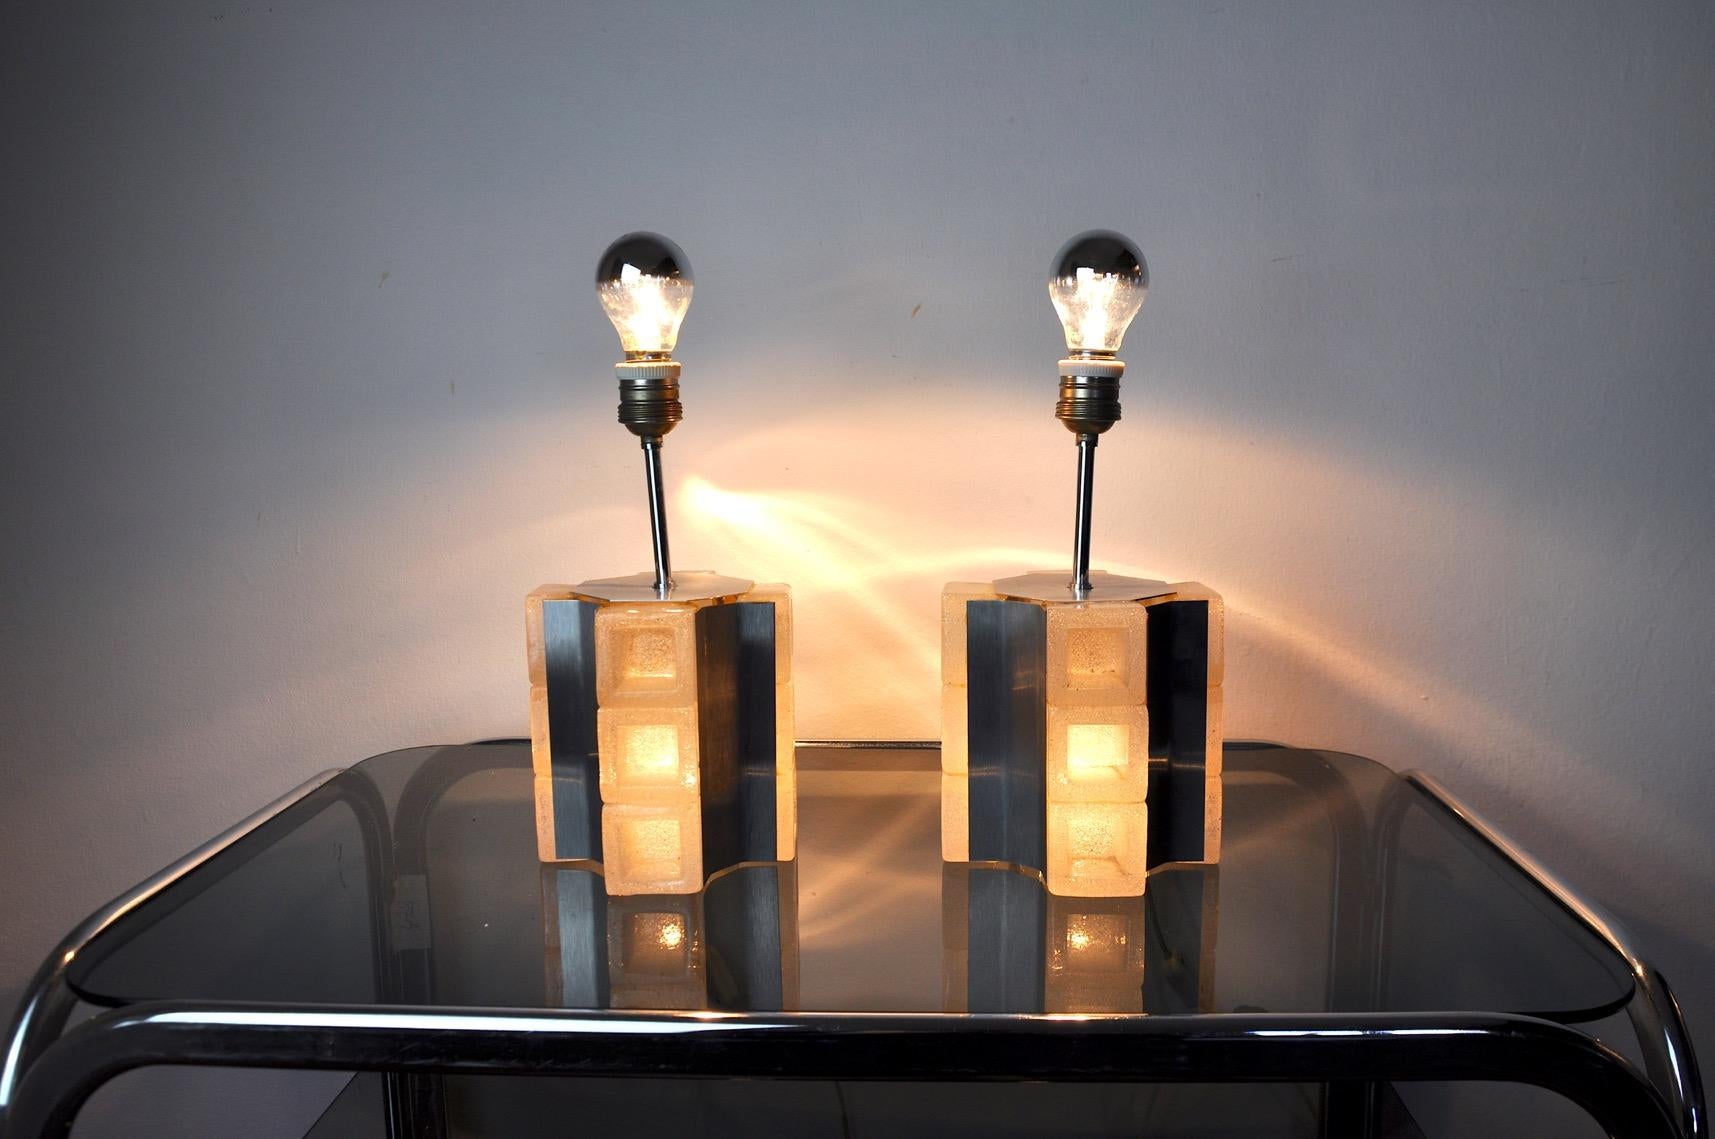 Superb and rare pair of cubic lamps by the famous Italian designer albano poli, produced by poliarte at the end of the 1960s. Pair of lamps made up of white murano glass cubes supported by a chromed metal structure. Iconic lamps that will illuminate